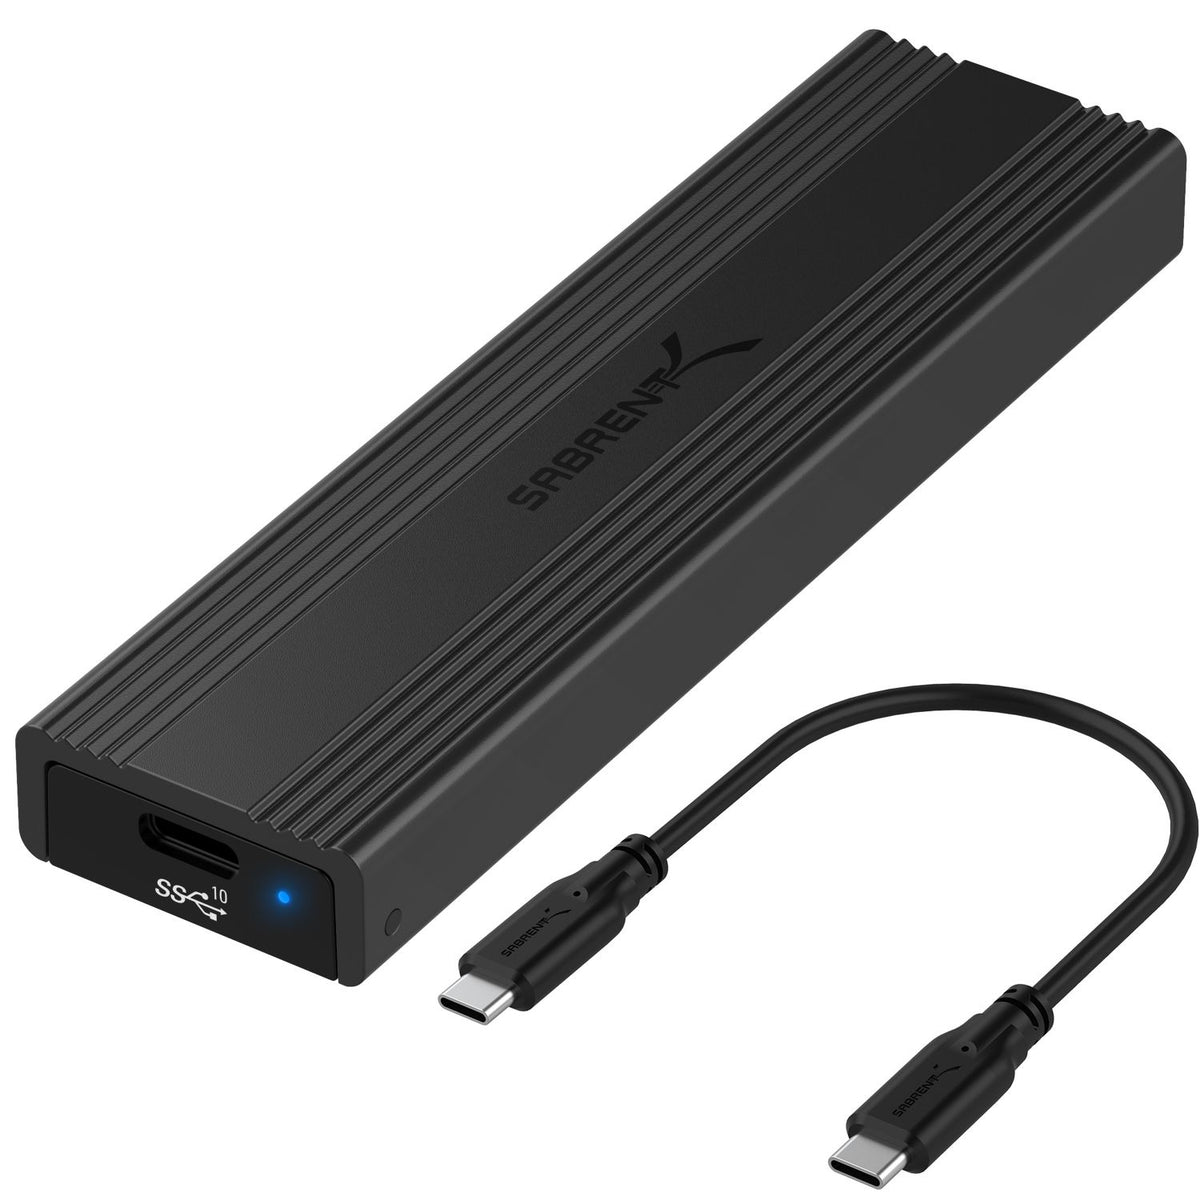 USB 3.2 Type-C Tool-Free Enclosure for M.2 PCIe NVMe and SATA SSDs